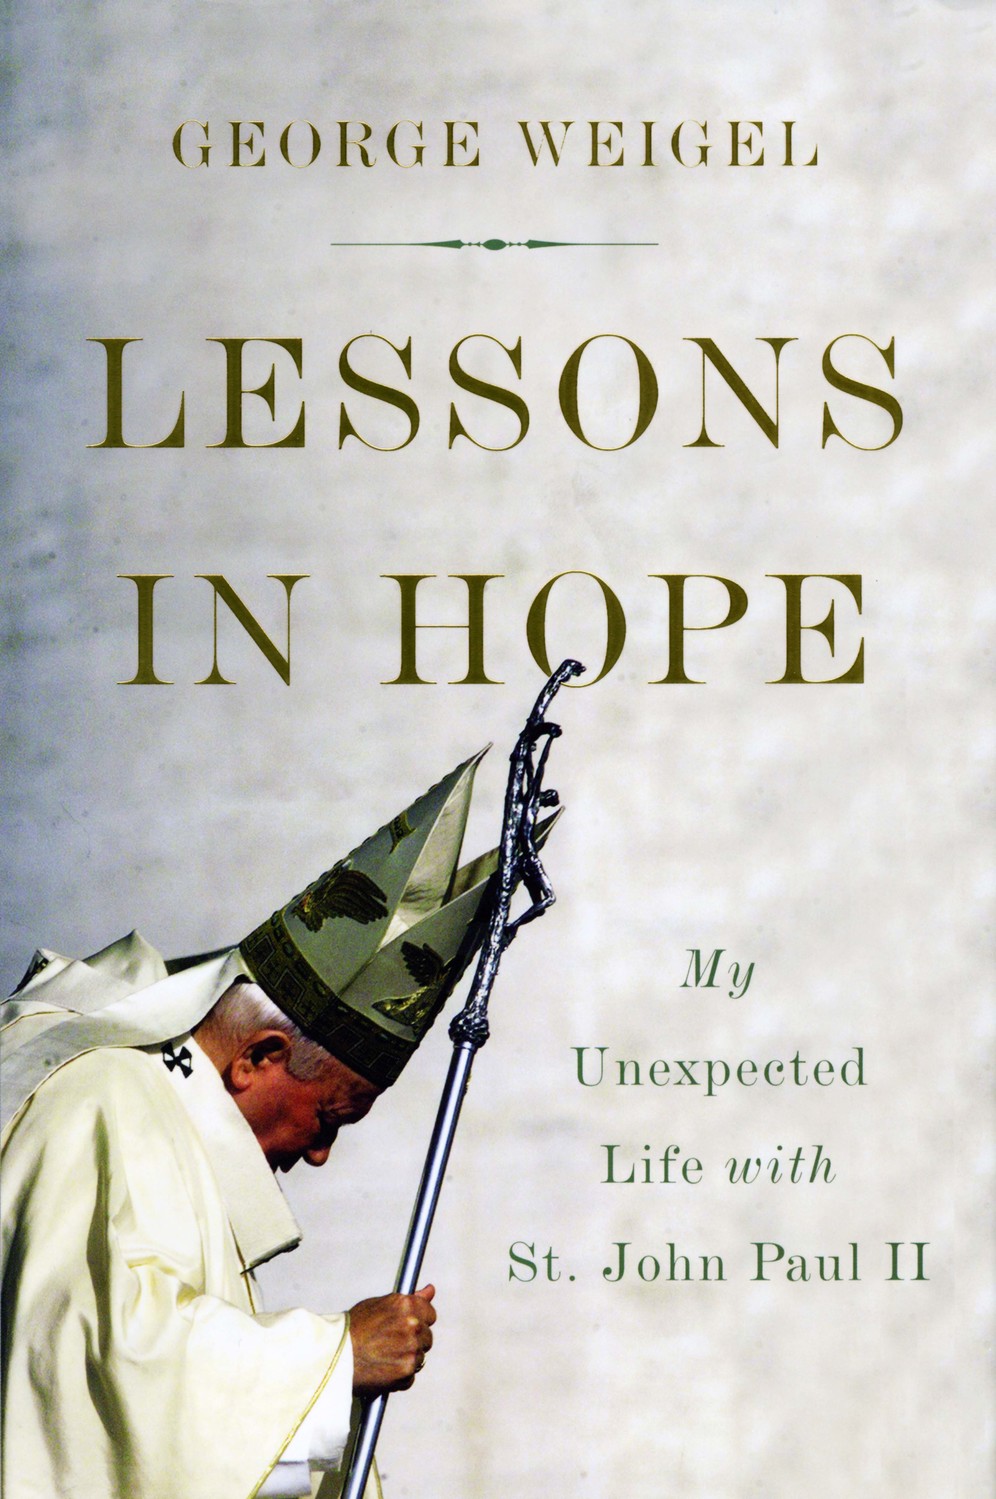 eorge Weigel’s latest book about St. John Paul II, “Lessons in Hope,” published last fall, is filled with personal anecdotes and memories that the pontiff shared with him over the years.